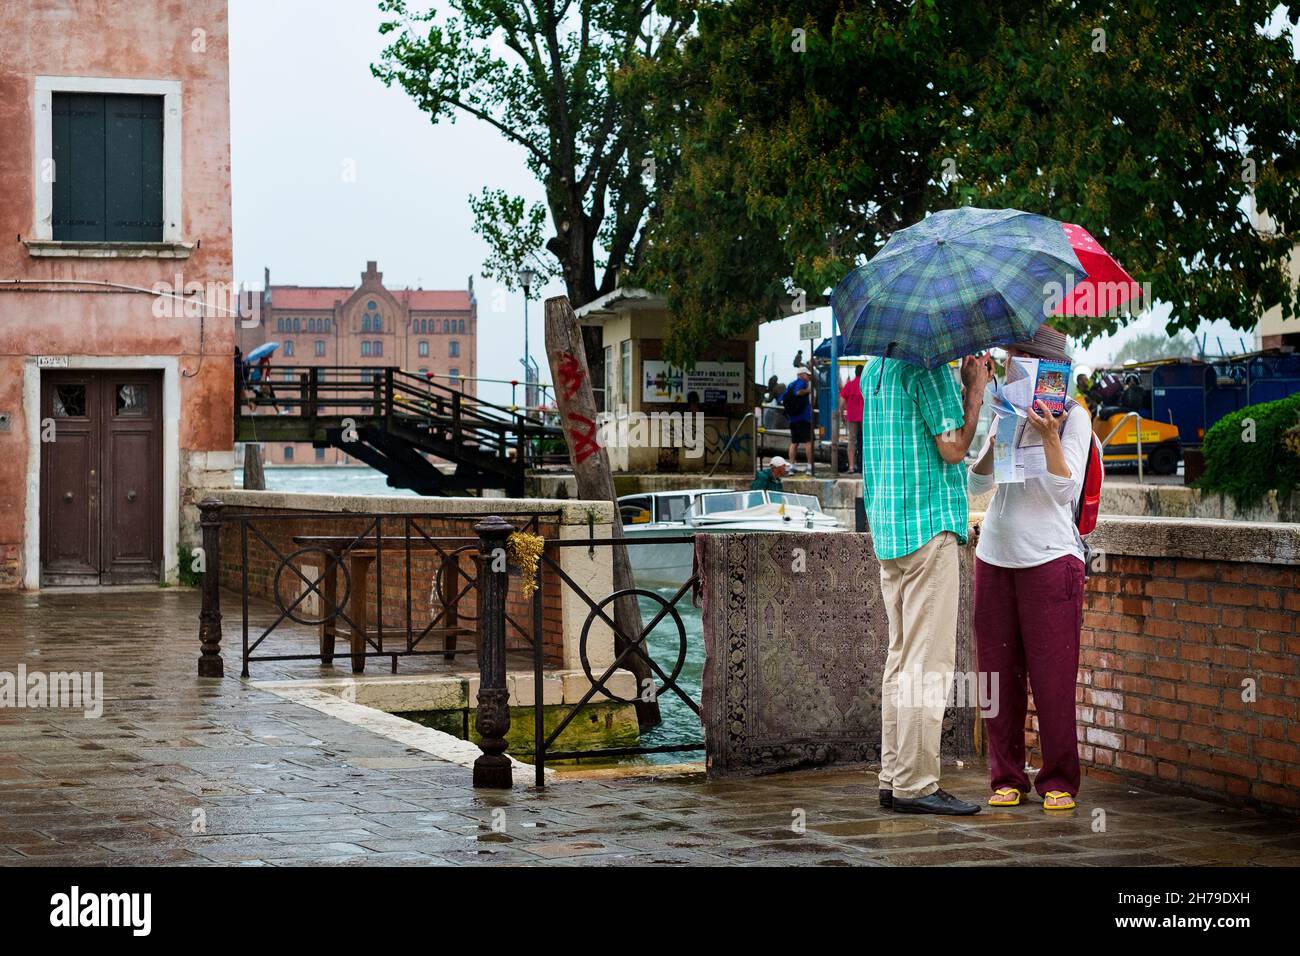 Tourists consult their map in the rain, Dosoduro, Venice, Italy. Stock Photo